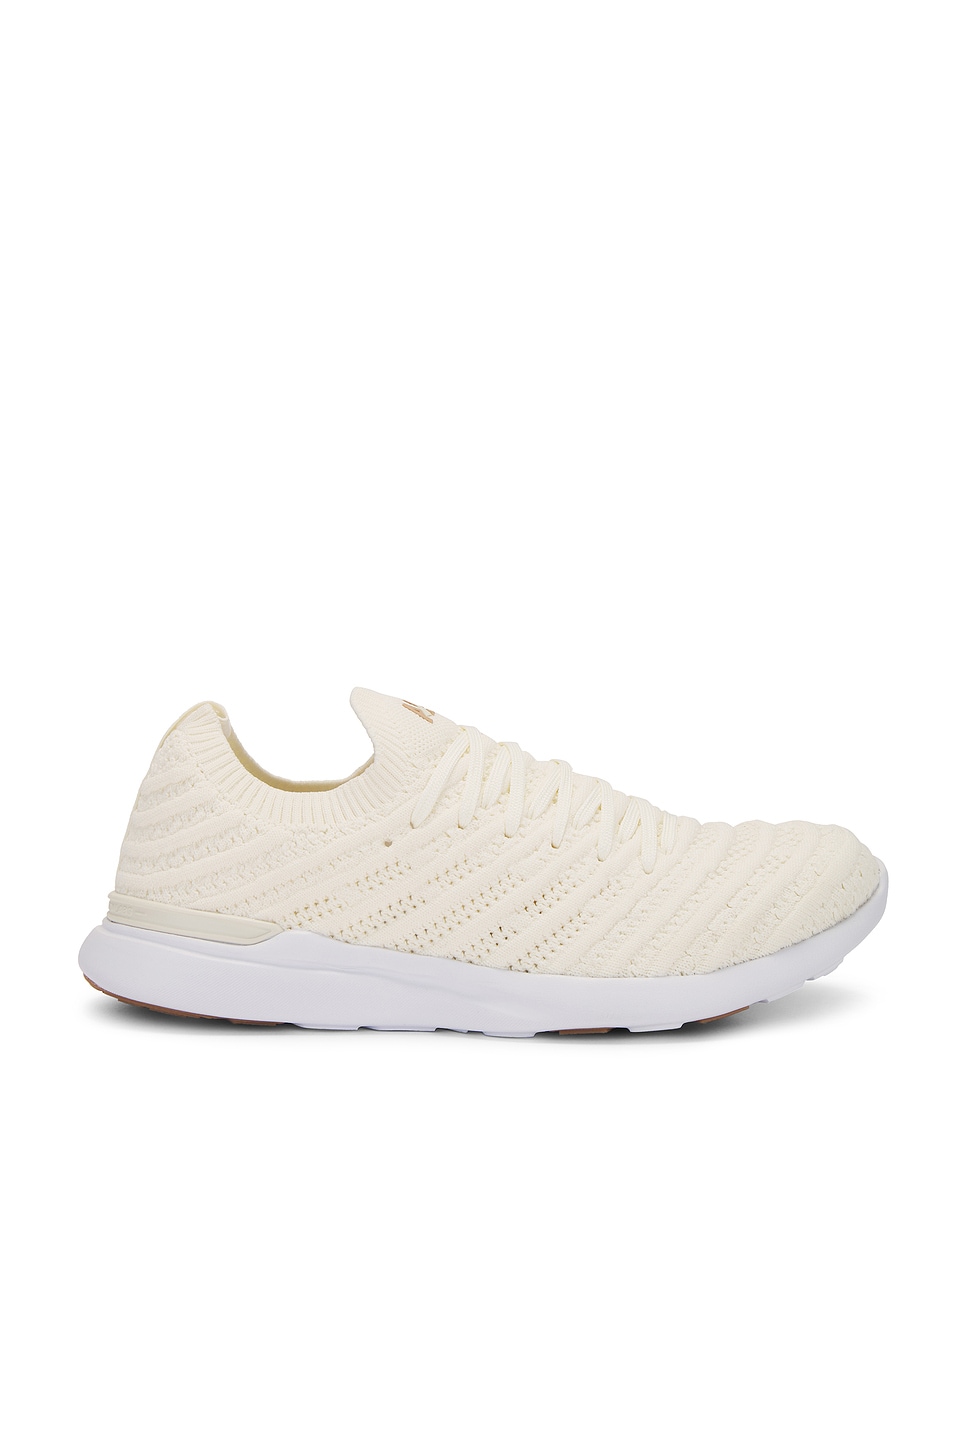 APL: ATHLETIC PROPULSION LABS TechLoom Wave sneakers - Neutrals